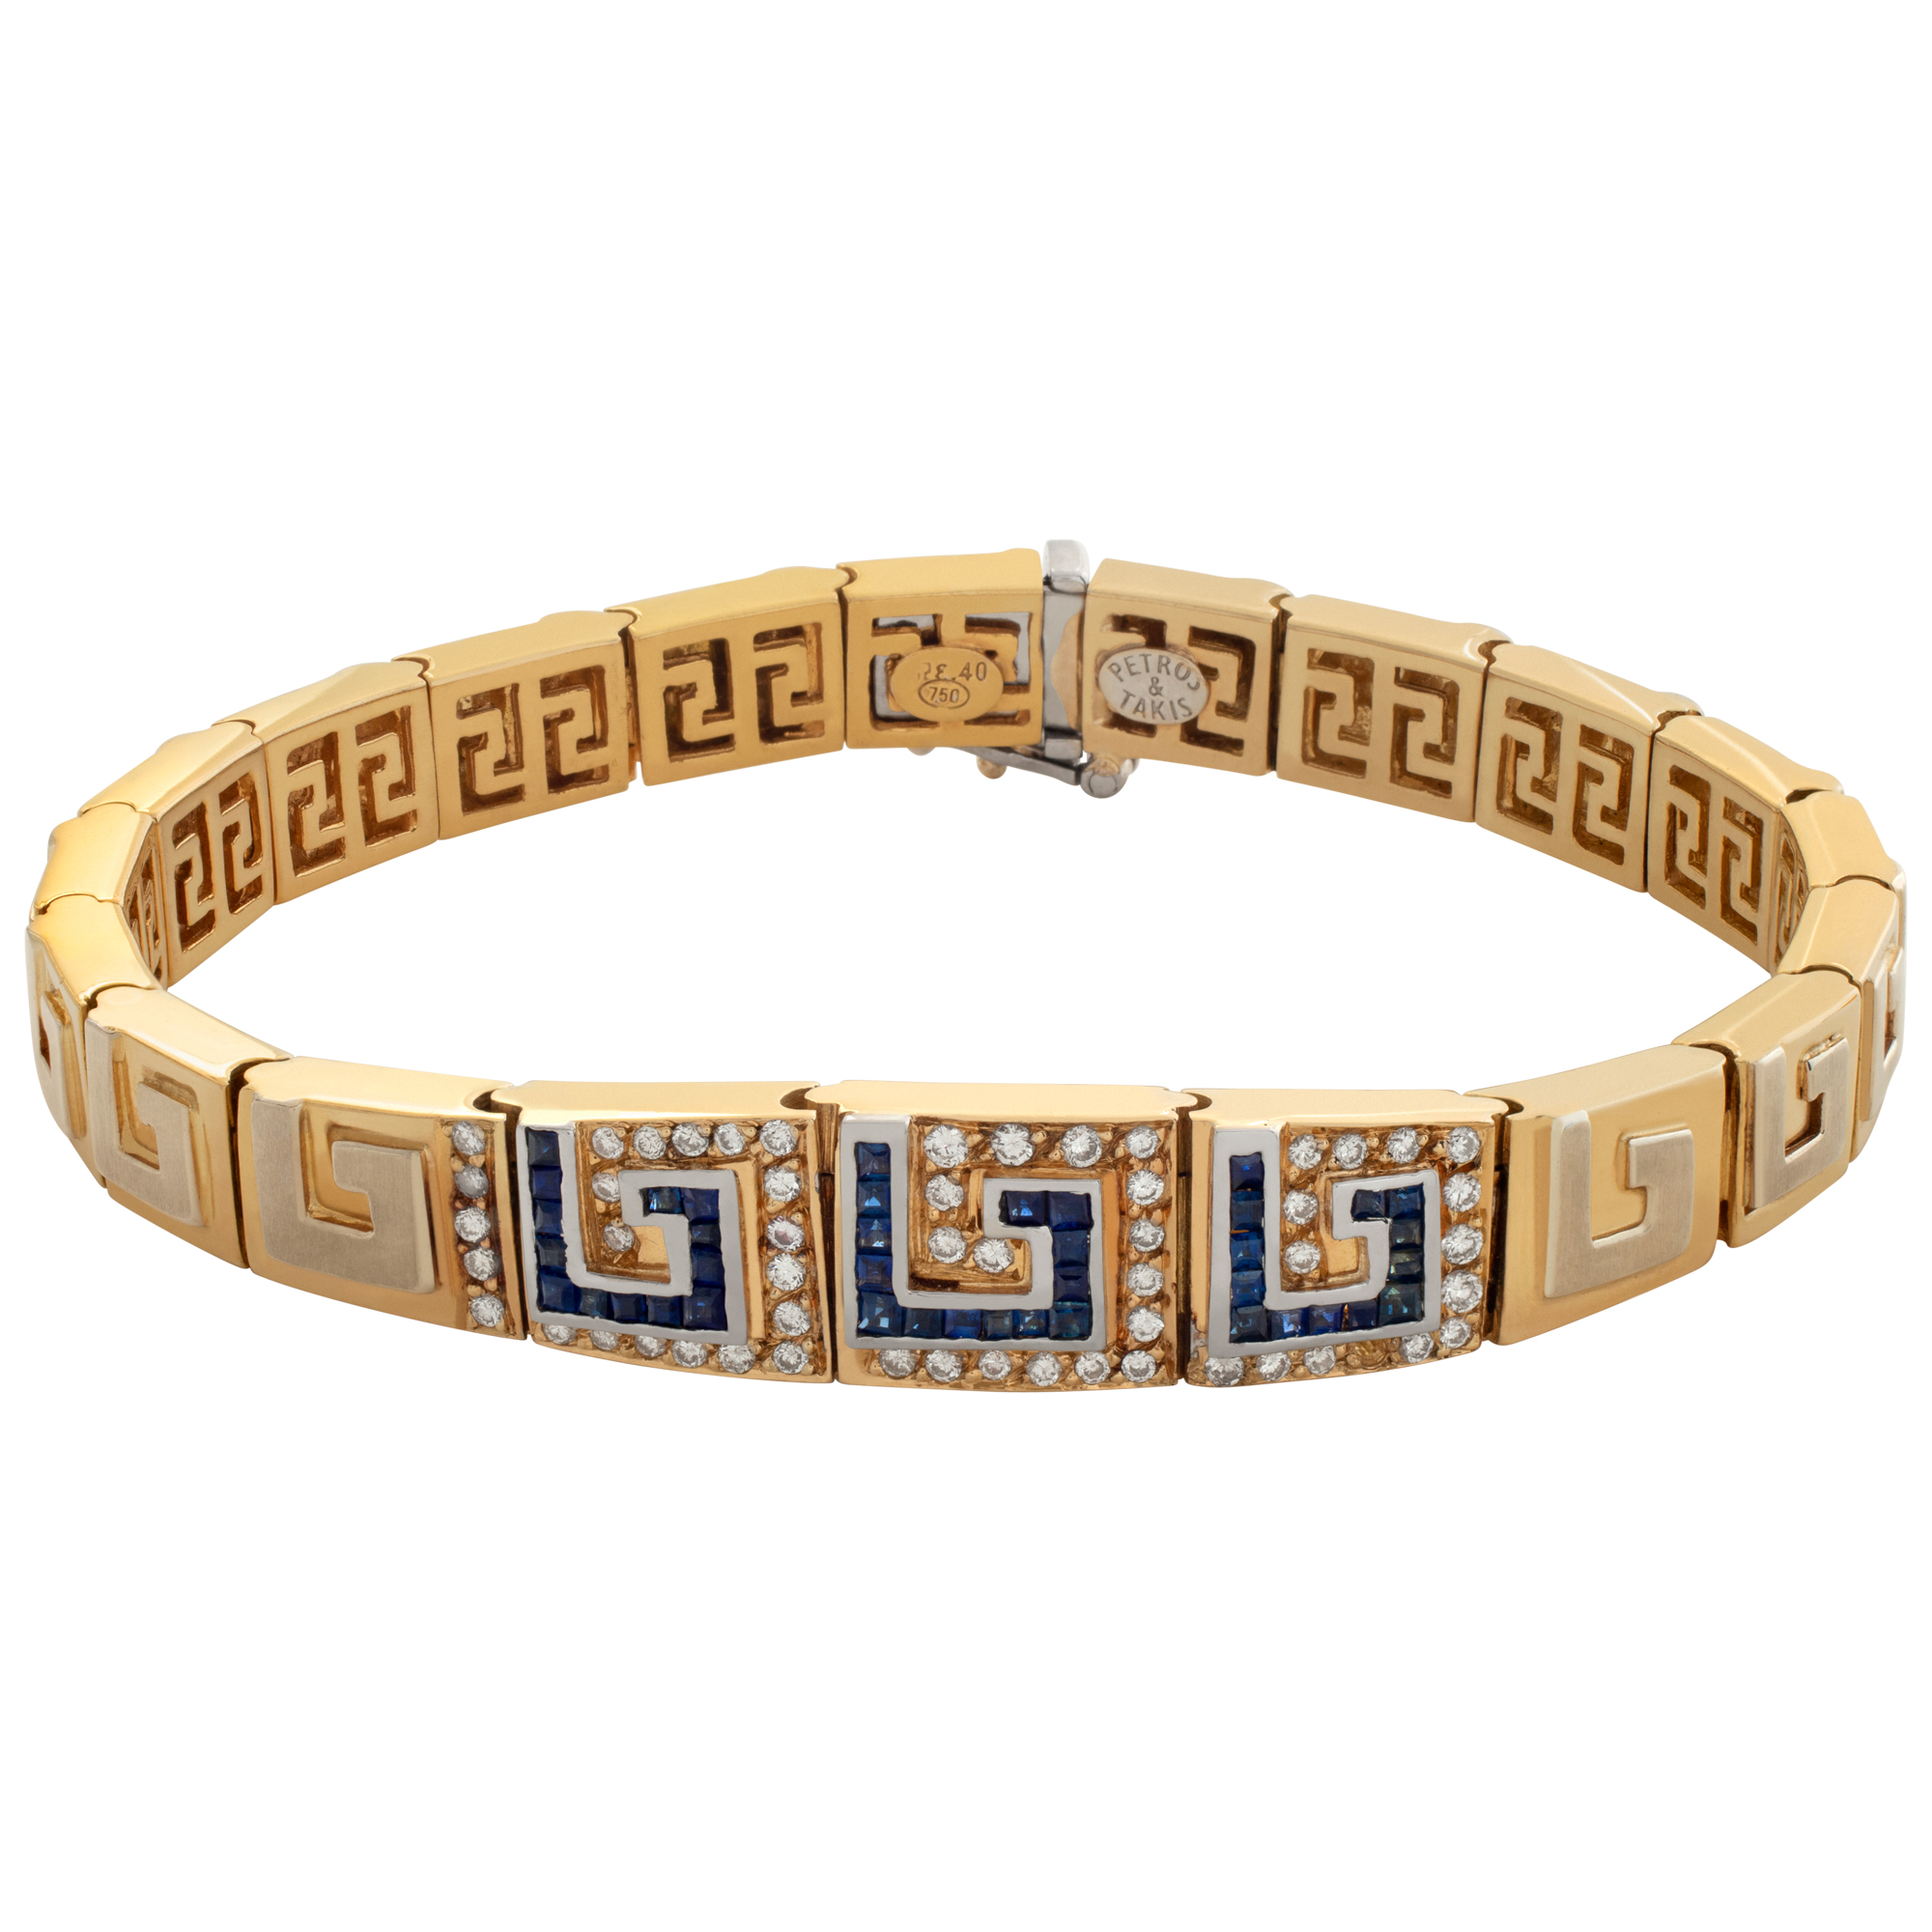 Etruscan revival bracelet with sapphires & round diamonds set in 18k image 1